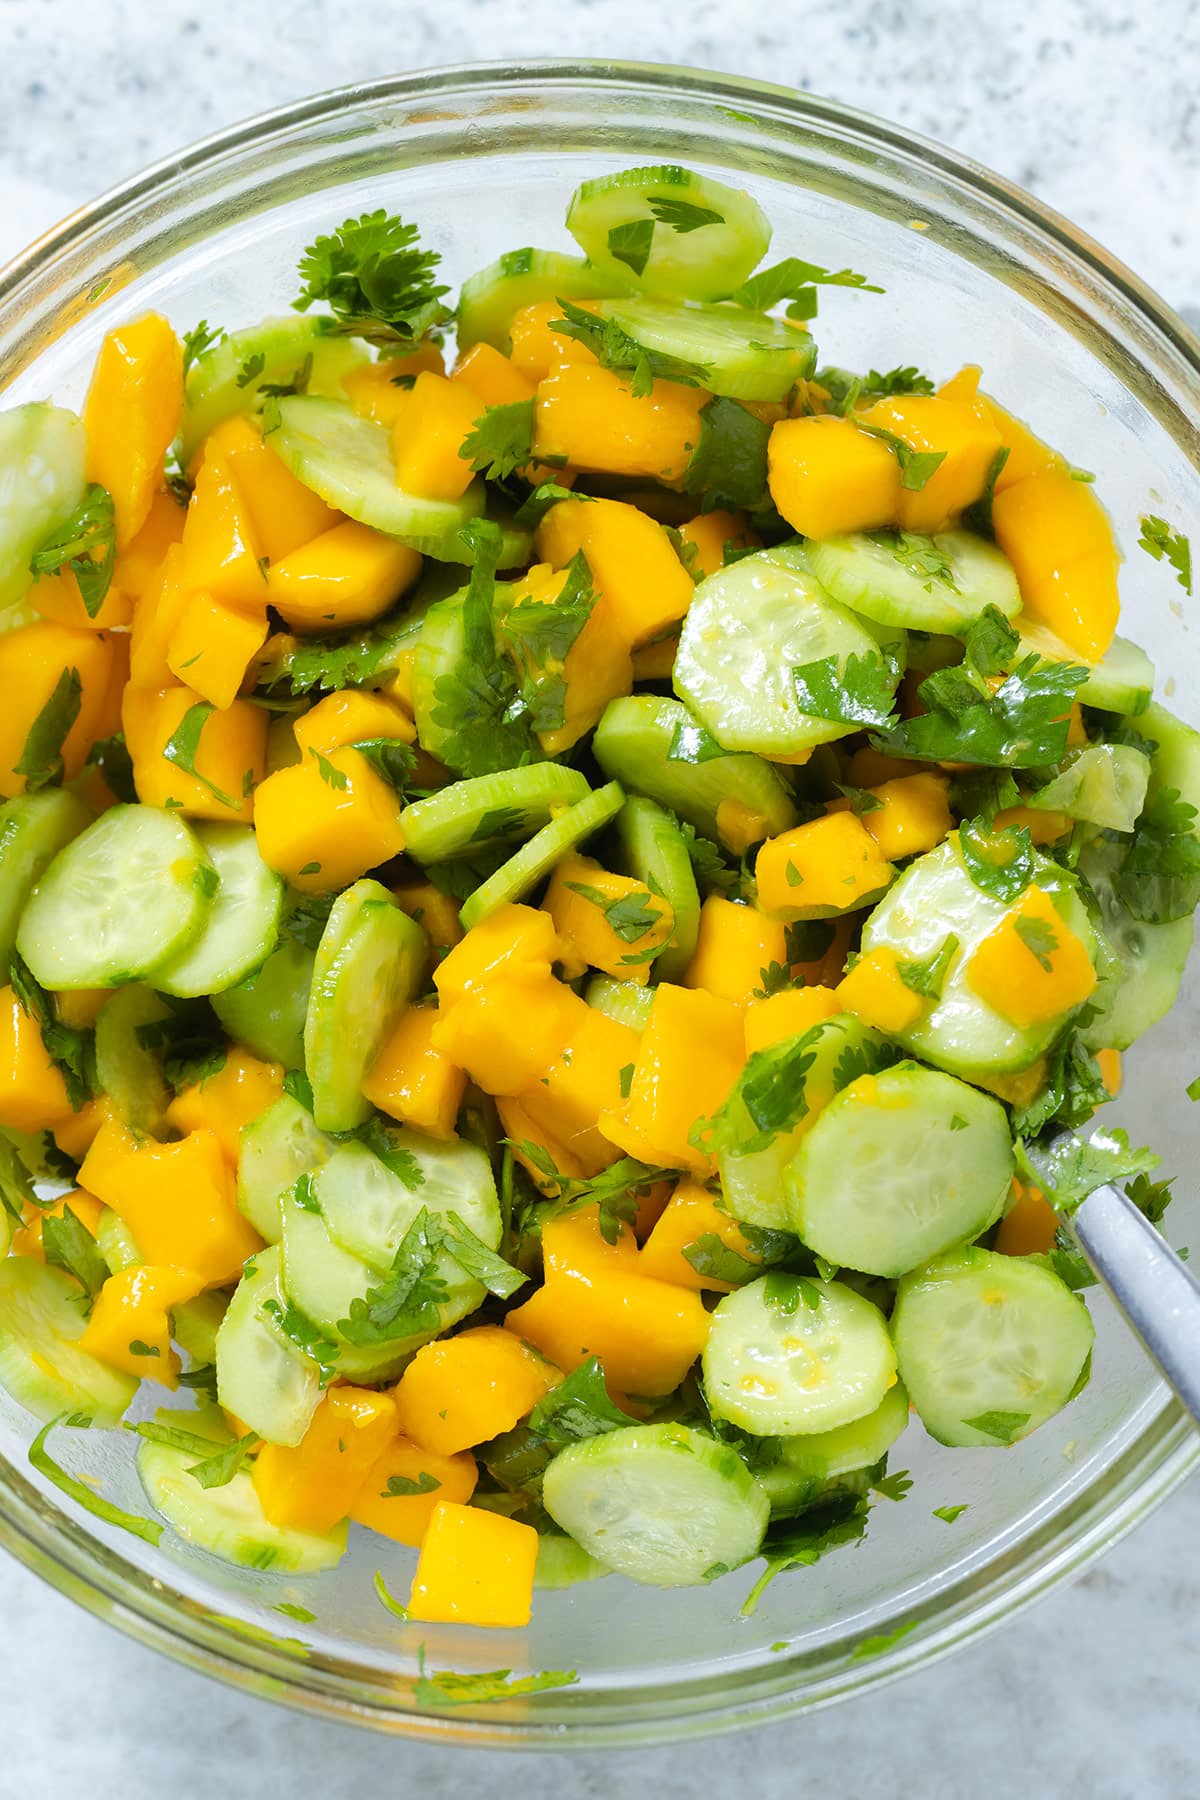 Mango and cucumber salad with fresh cilantro and sesame seeds in a glass bowl with a white rim.